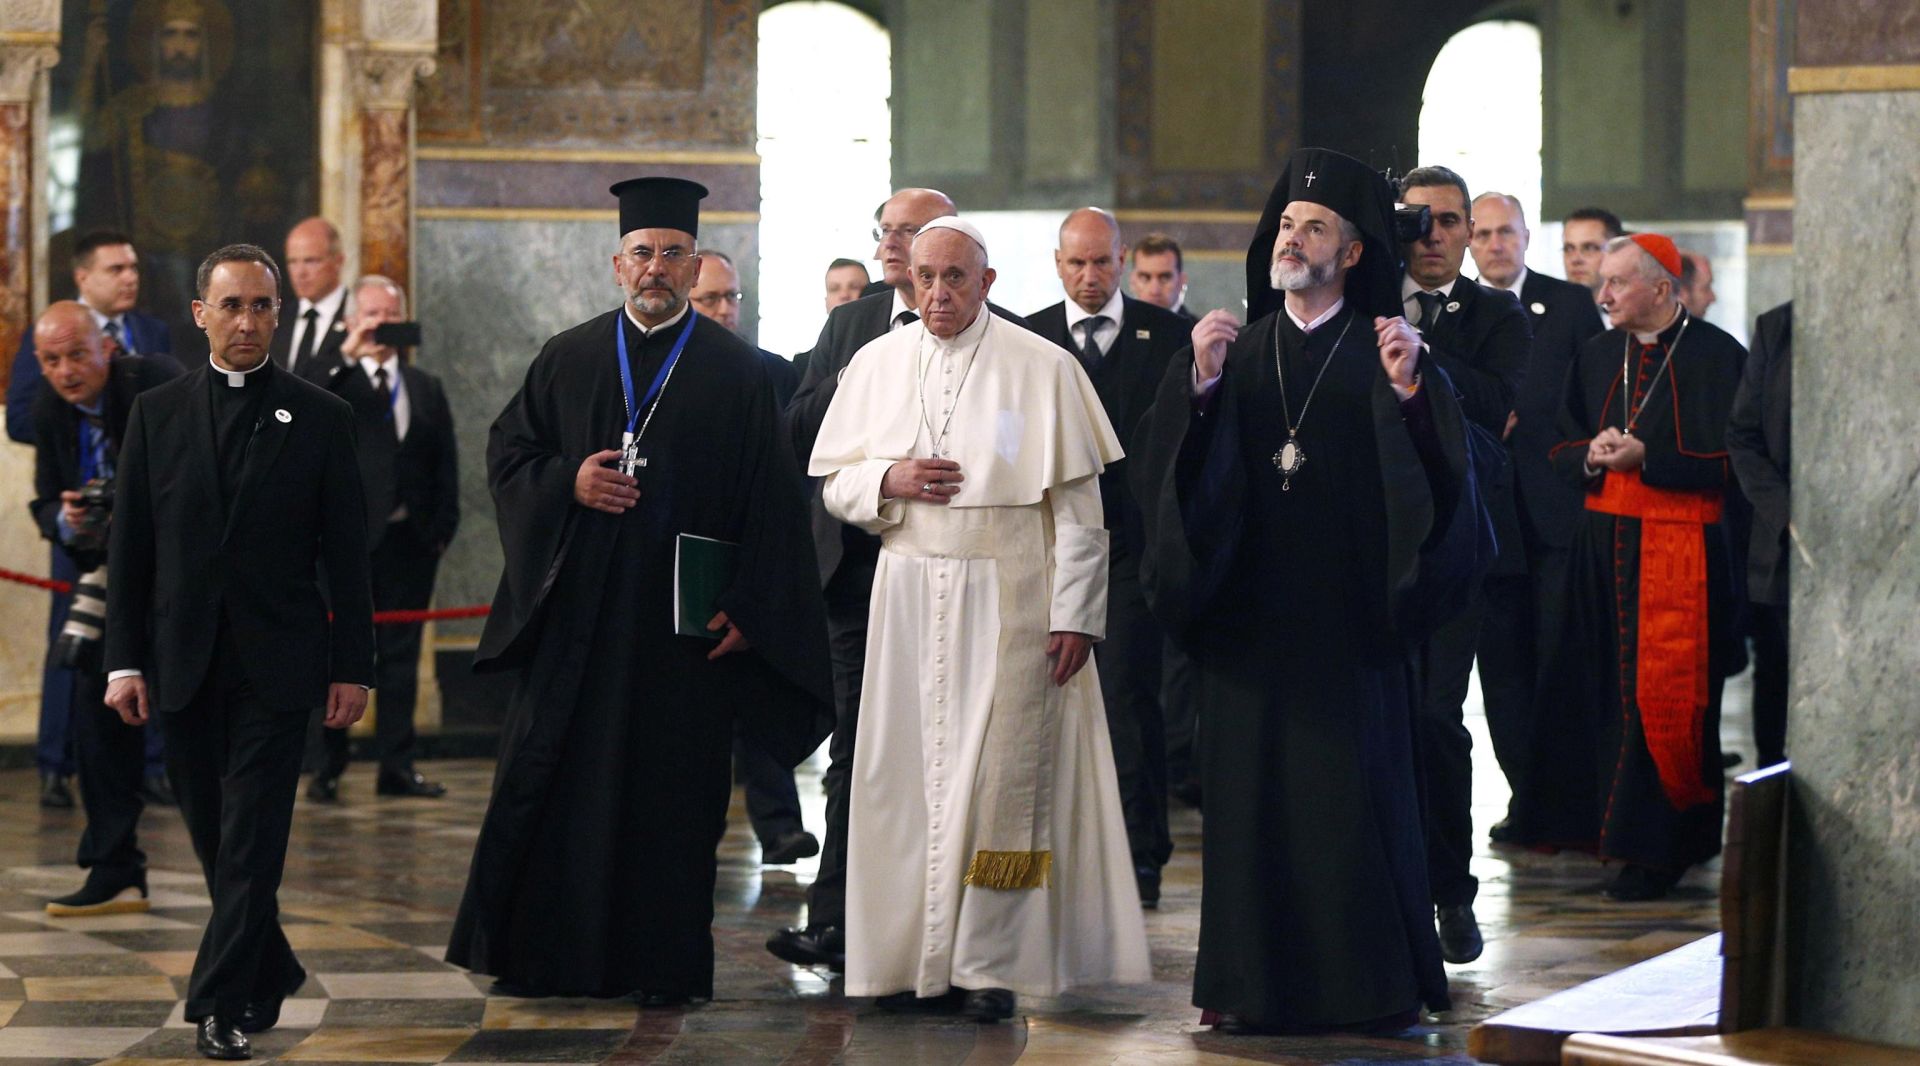 epa07548335 Pope Francis (C) enters Alexander Nevski Cathedral in Sofia, Bulgaria, 05 May 2019. Pope Francis is visiting Bulgaria and North Macedonia from 05 to 07 May; his 29th Apostolic Journey abroad.  EPA/YARA NARDI / POOL